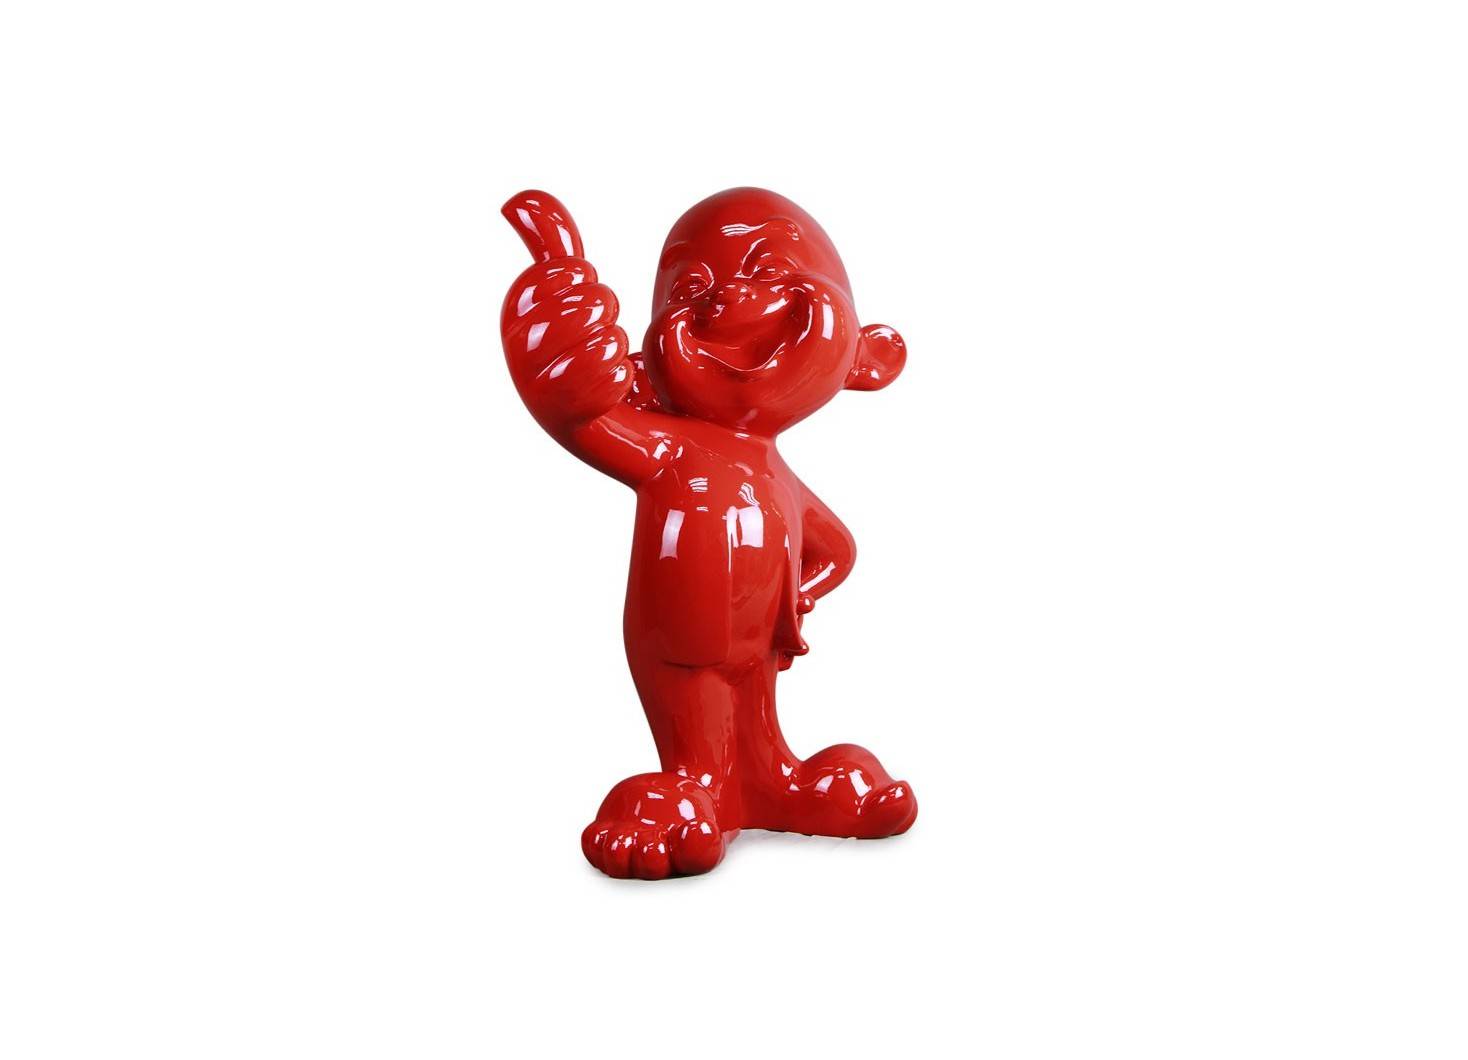 Thumbs up red baby statue